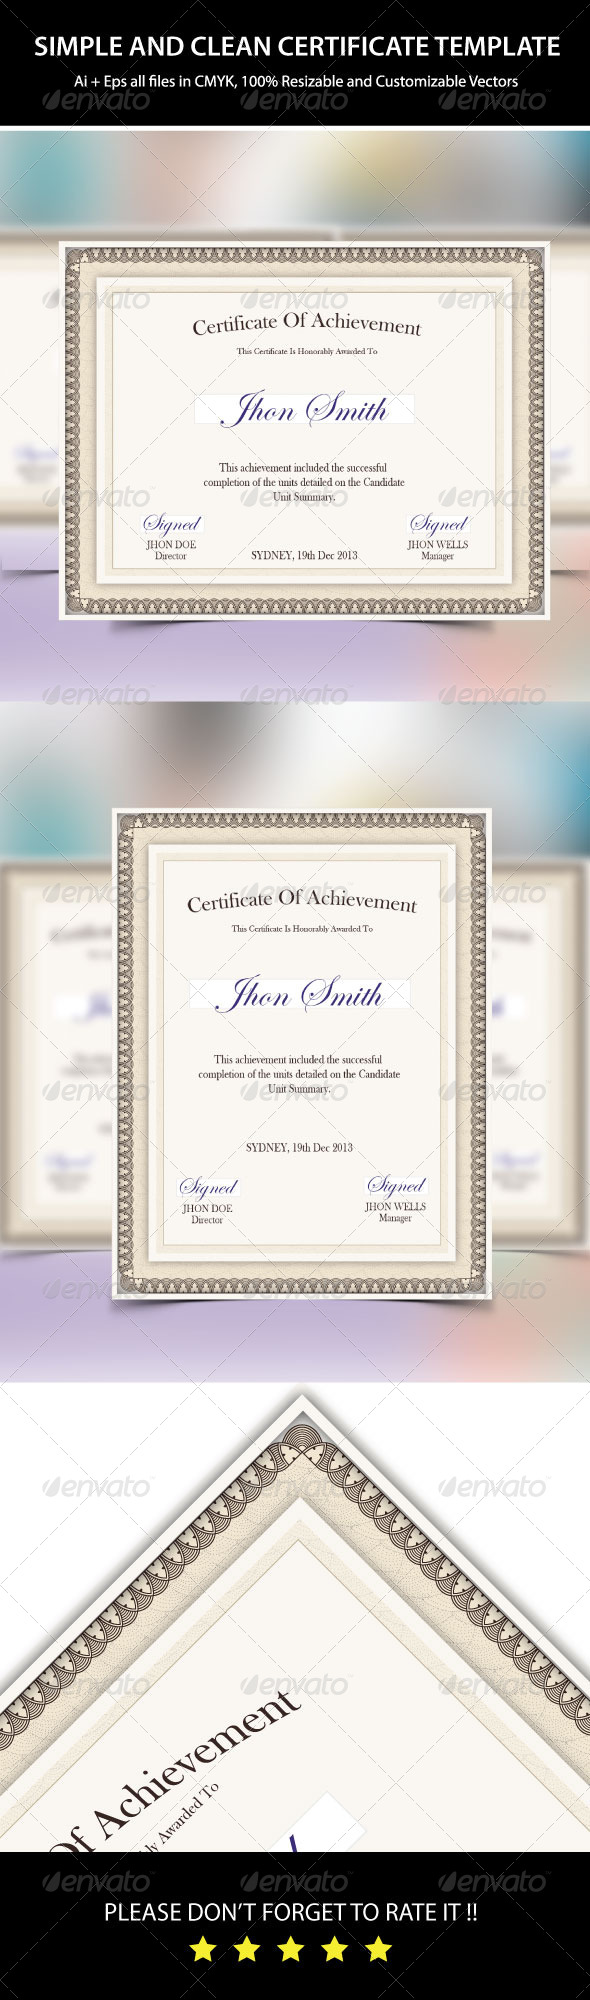 GraphicRiver Simple & Clean Certificate Template 7720614